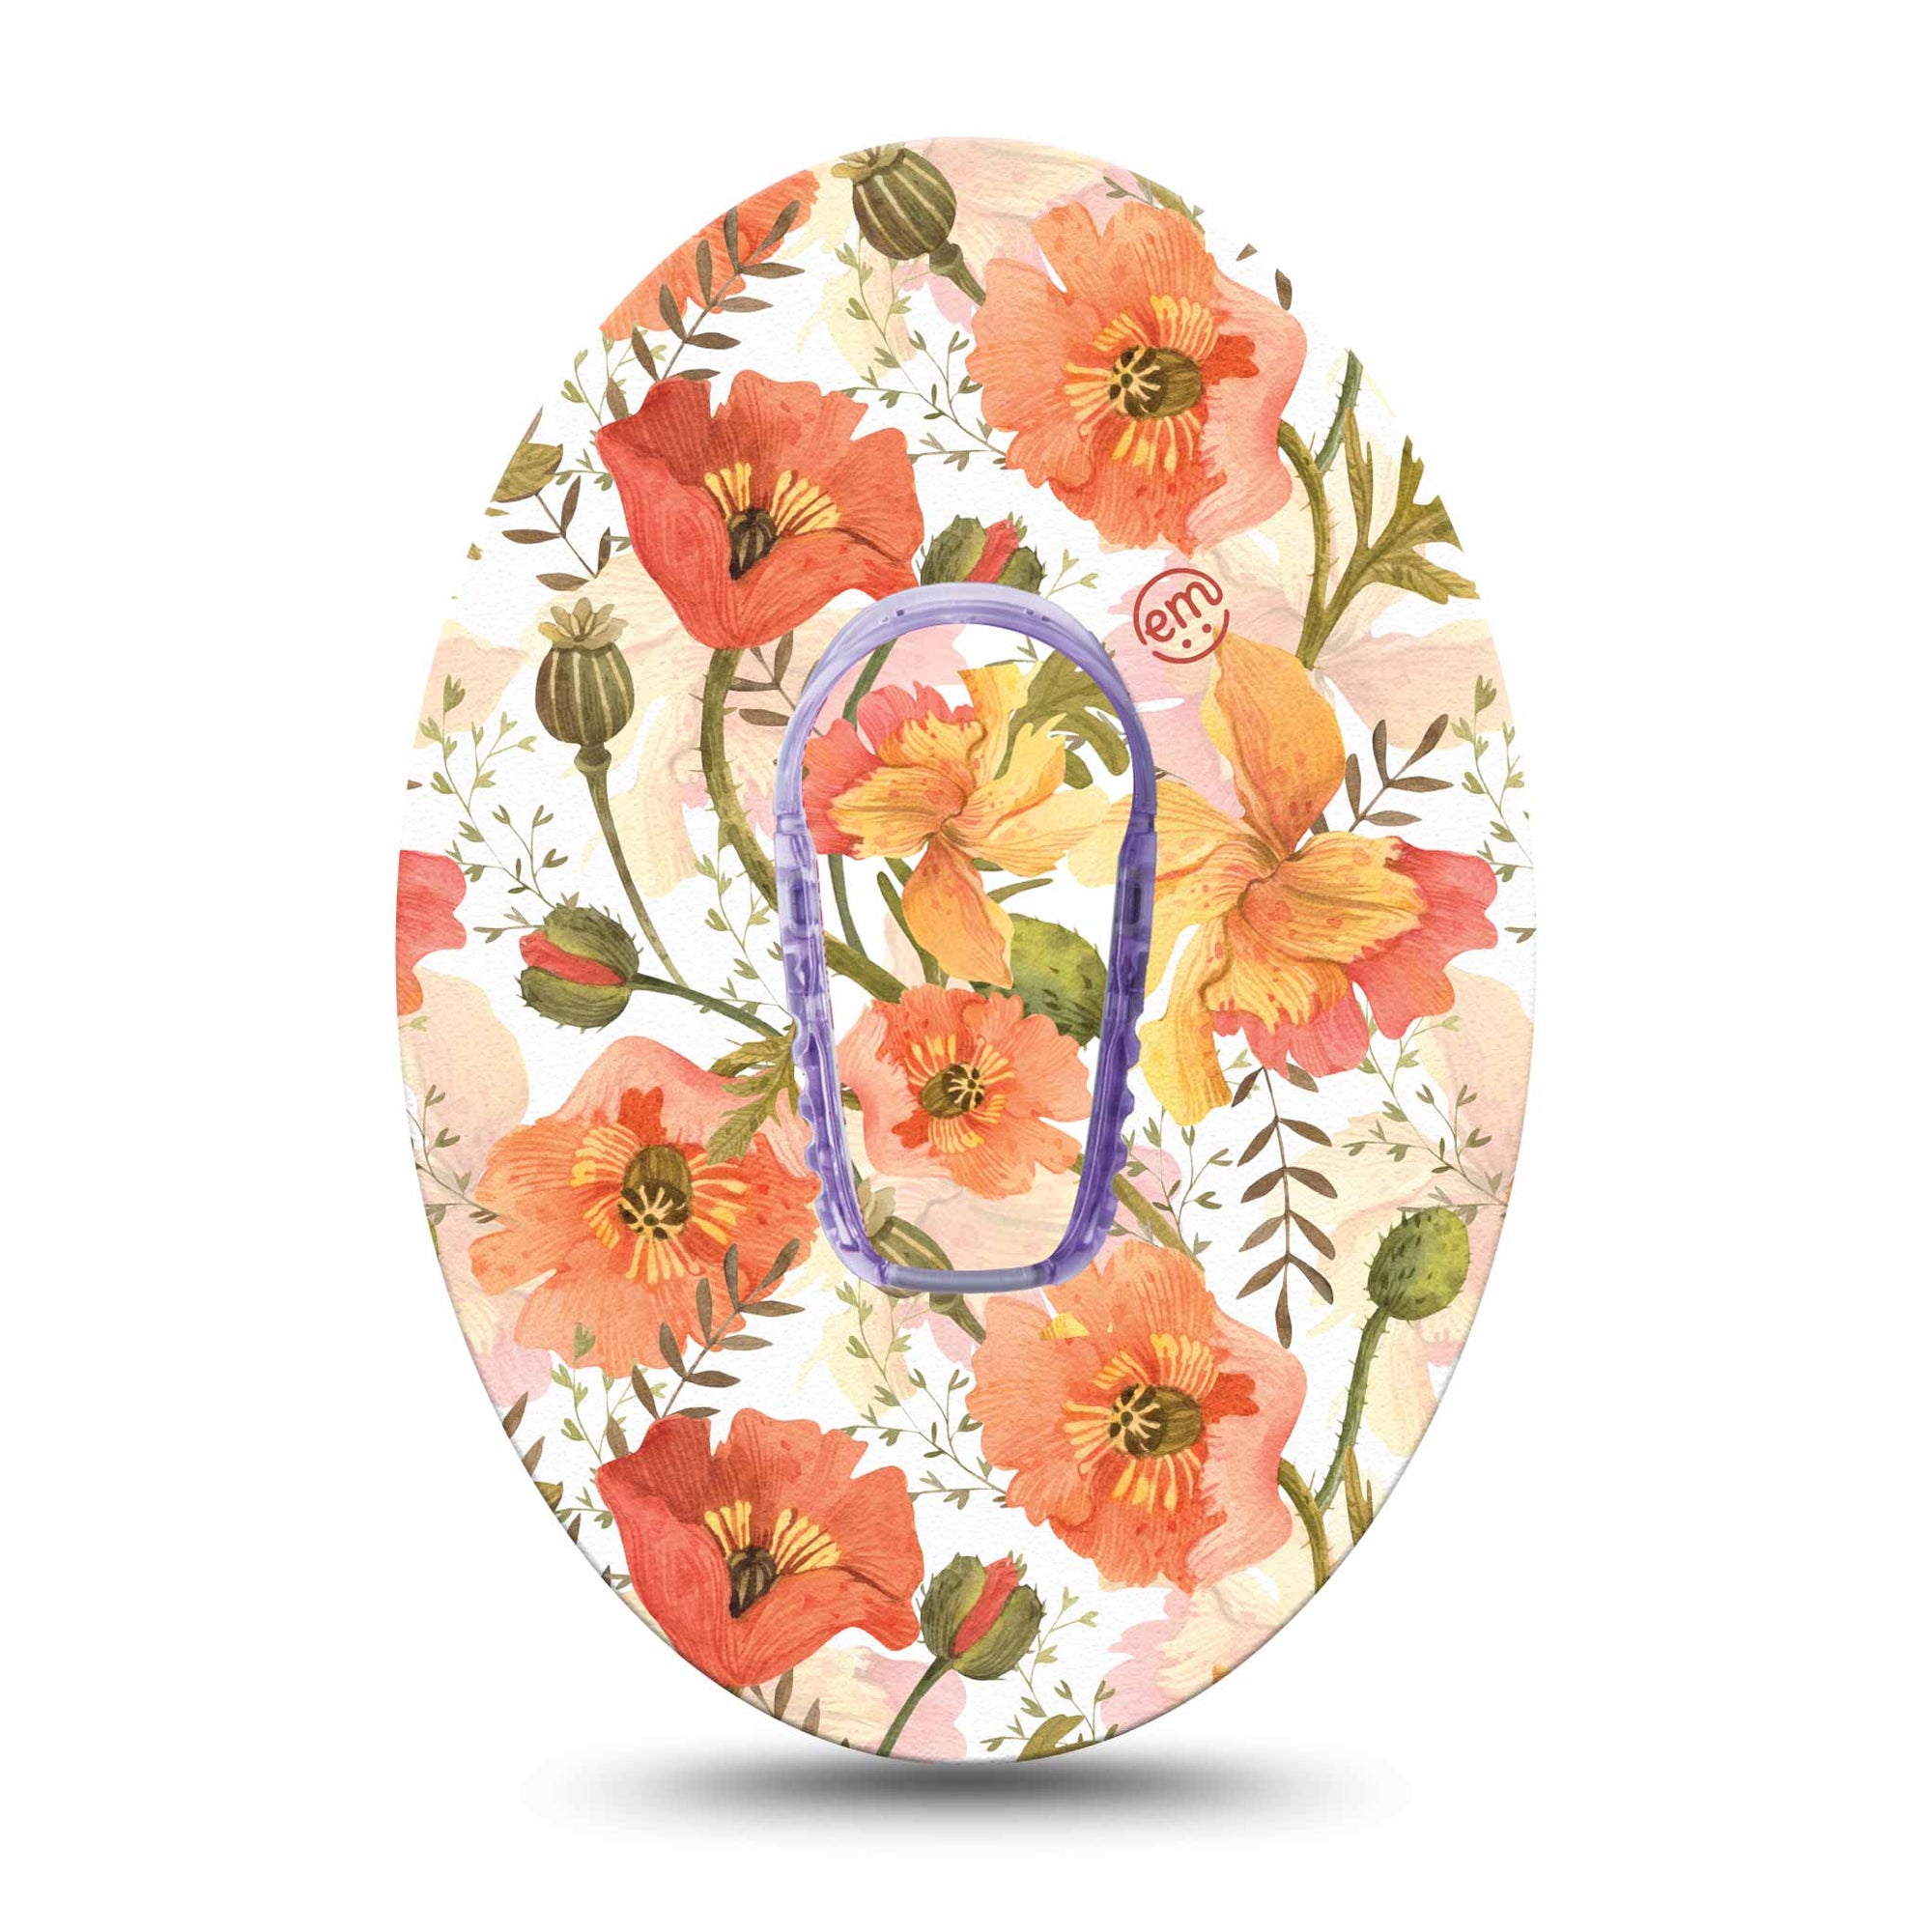 ExpressionMed Peachy Blooms G6 Transmitter Sticker